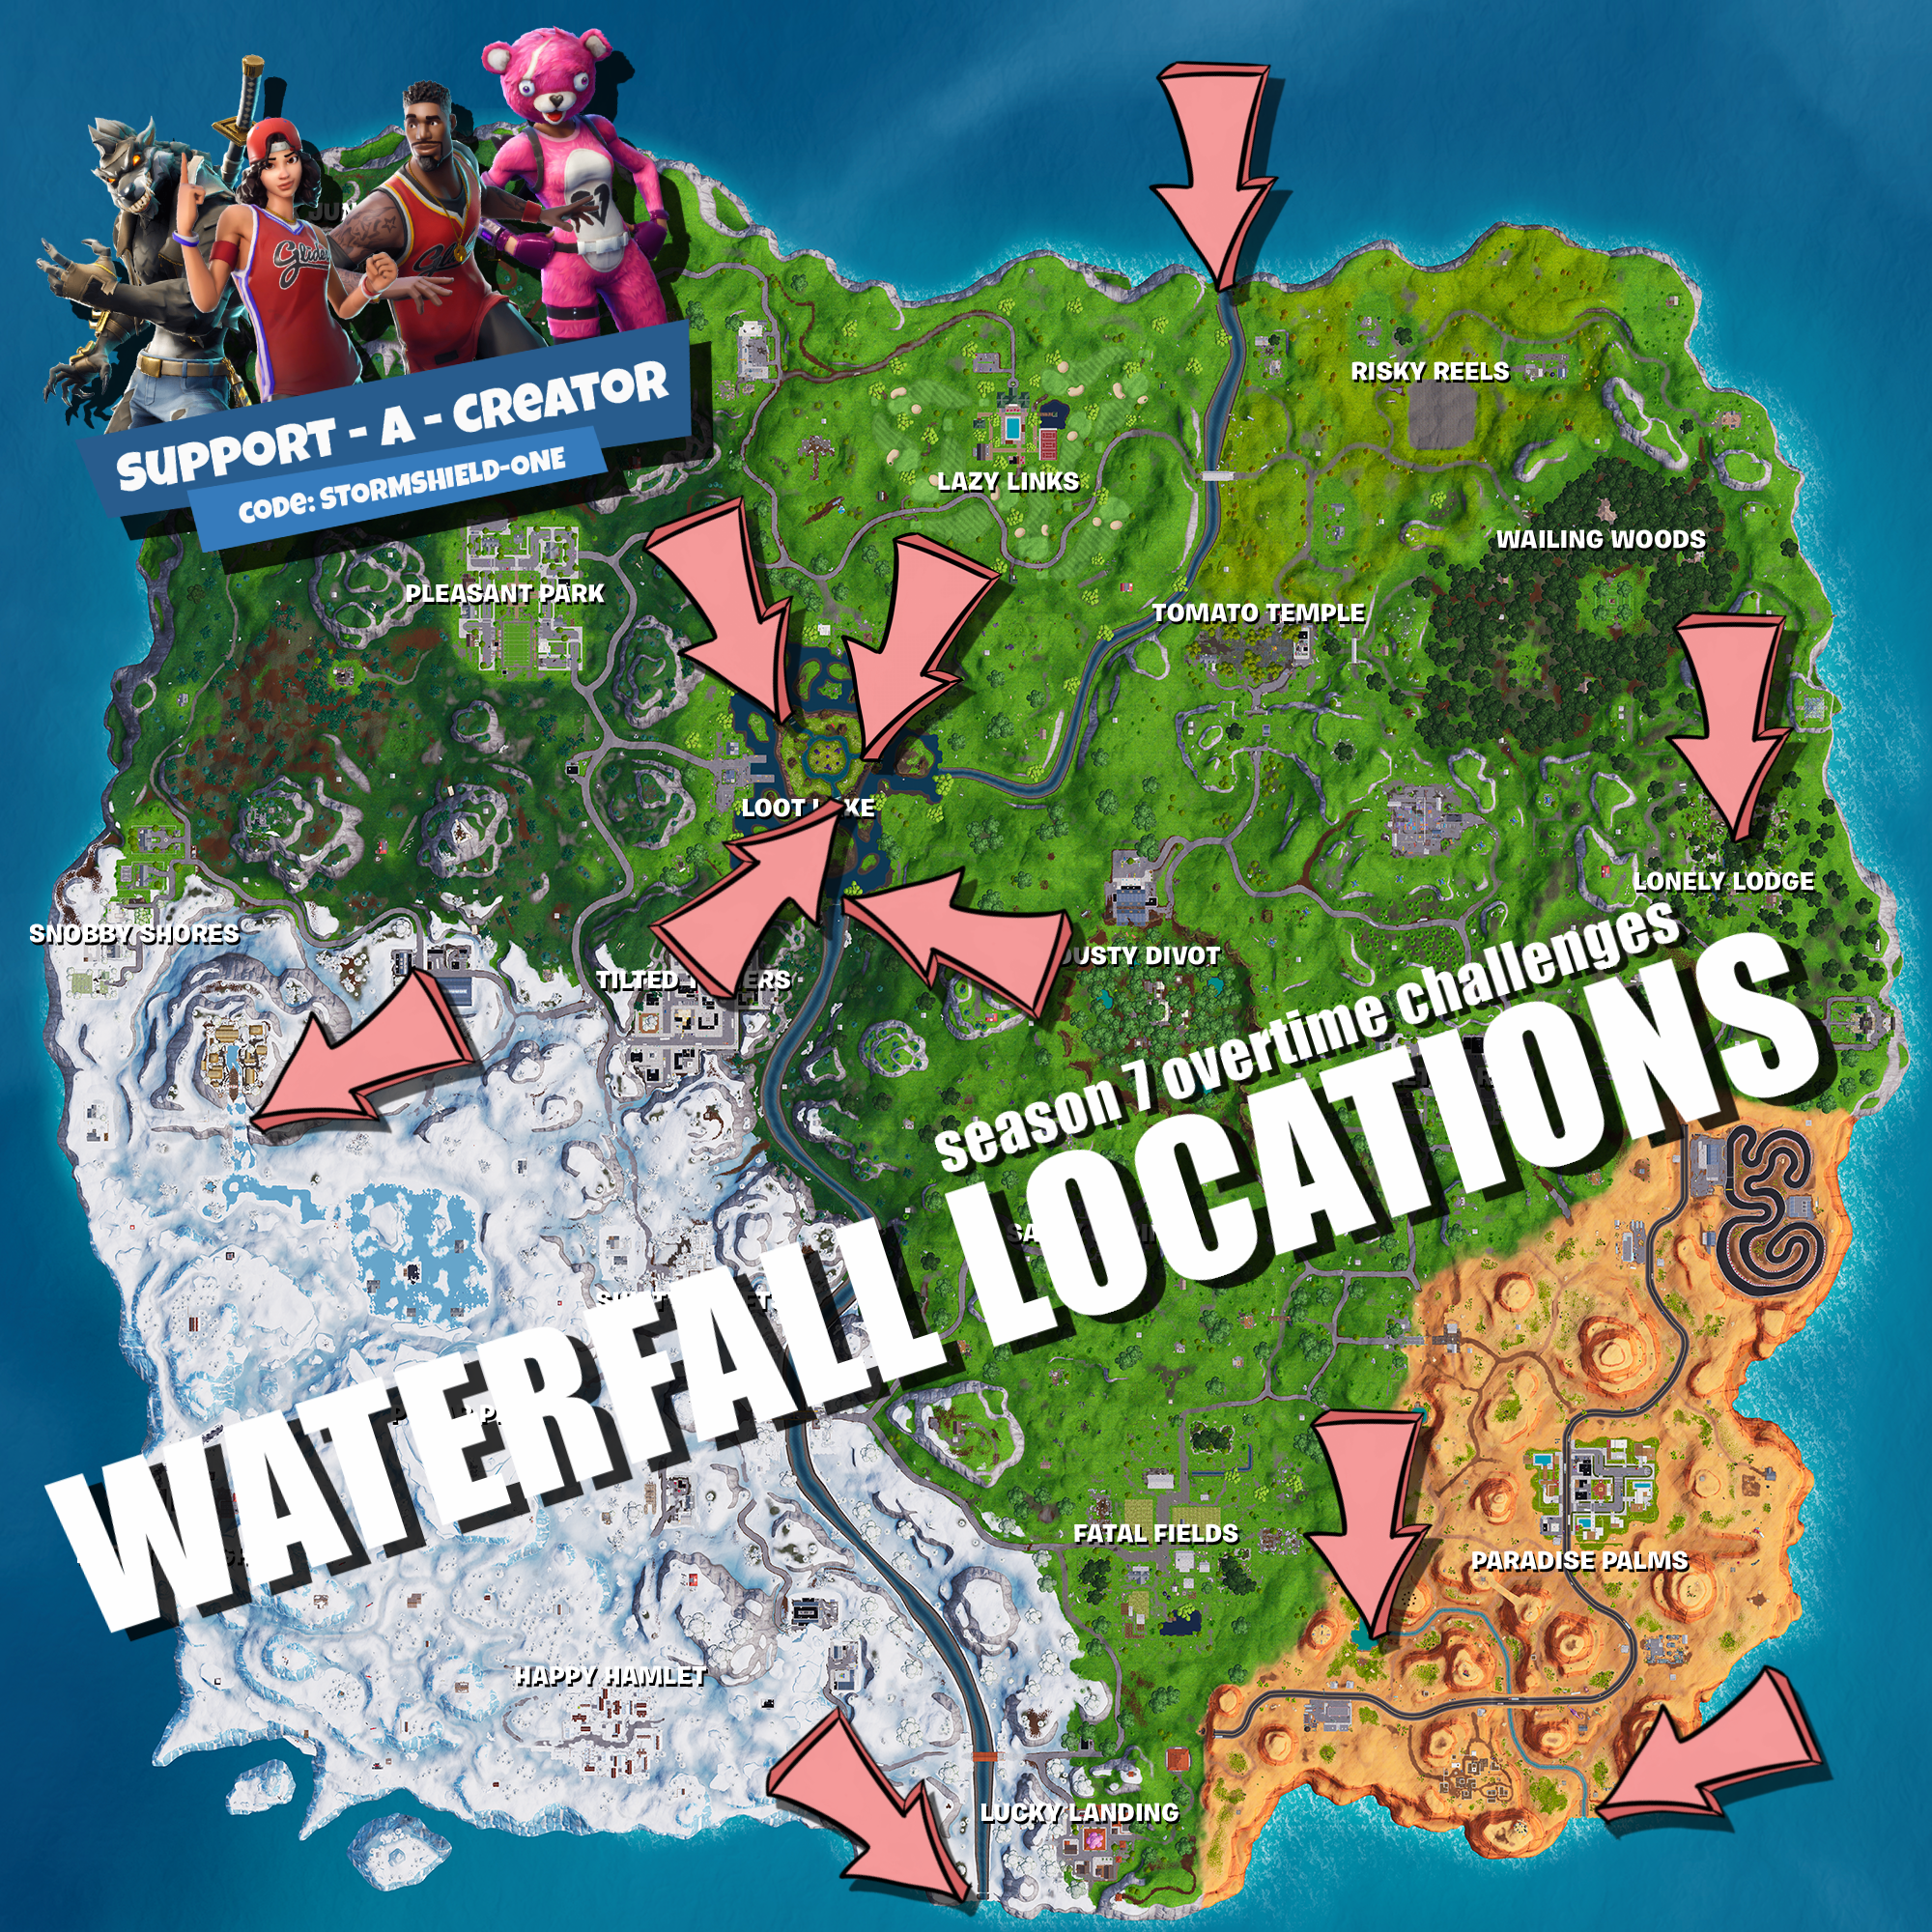 Fortnite Battle Royale Overtime Challenge Maps Fortnite News And - right click view image for full resolution